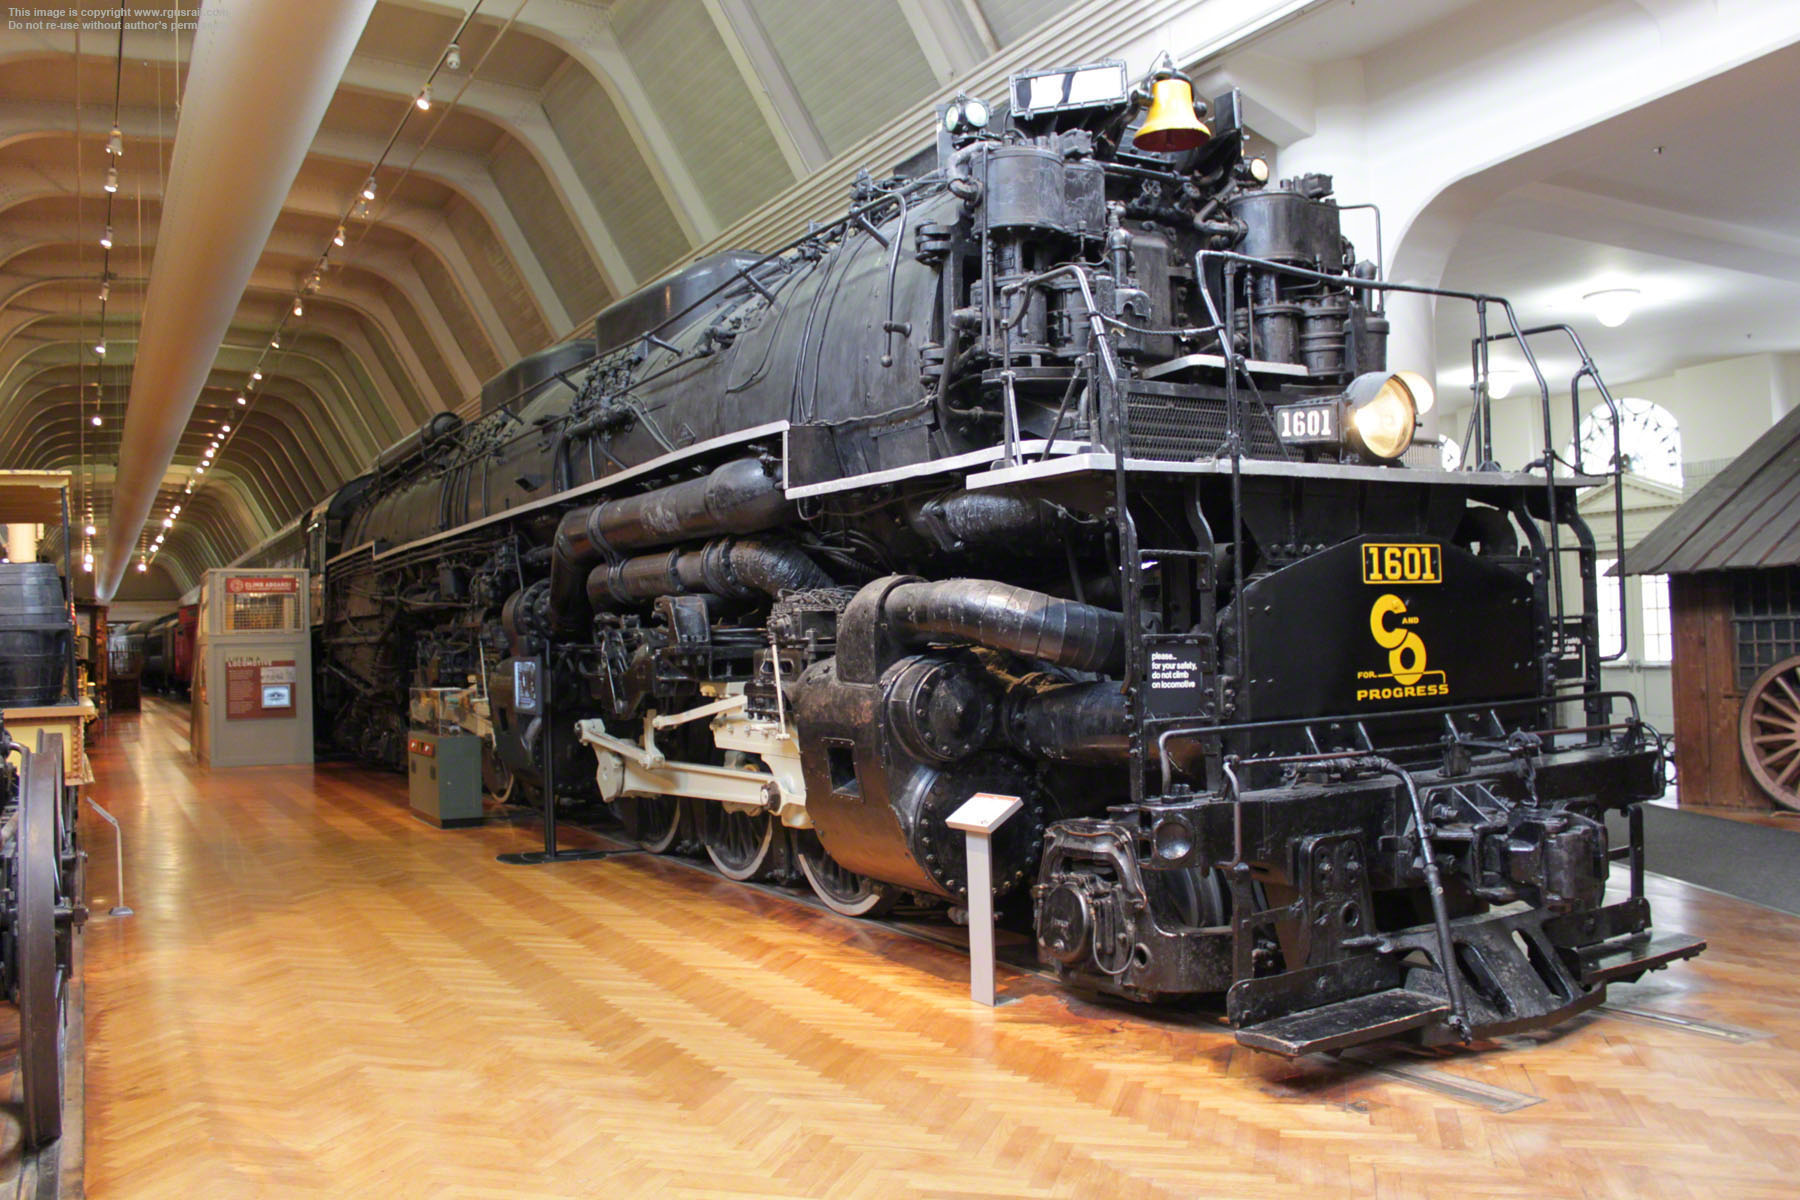 Allegheny locomotive henry ford museum #6